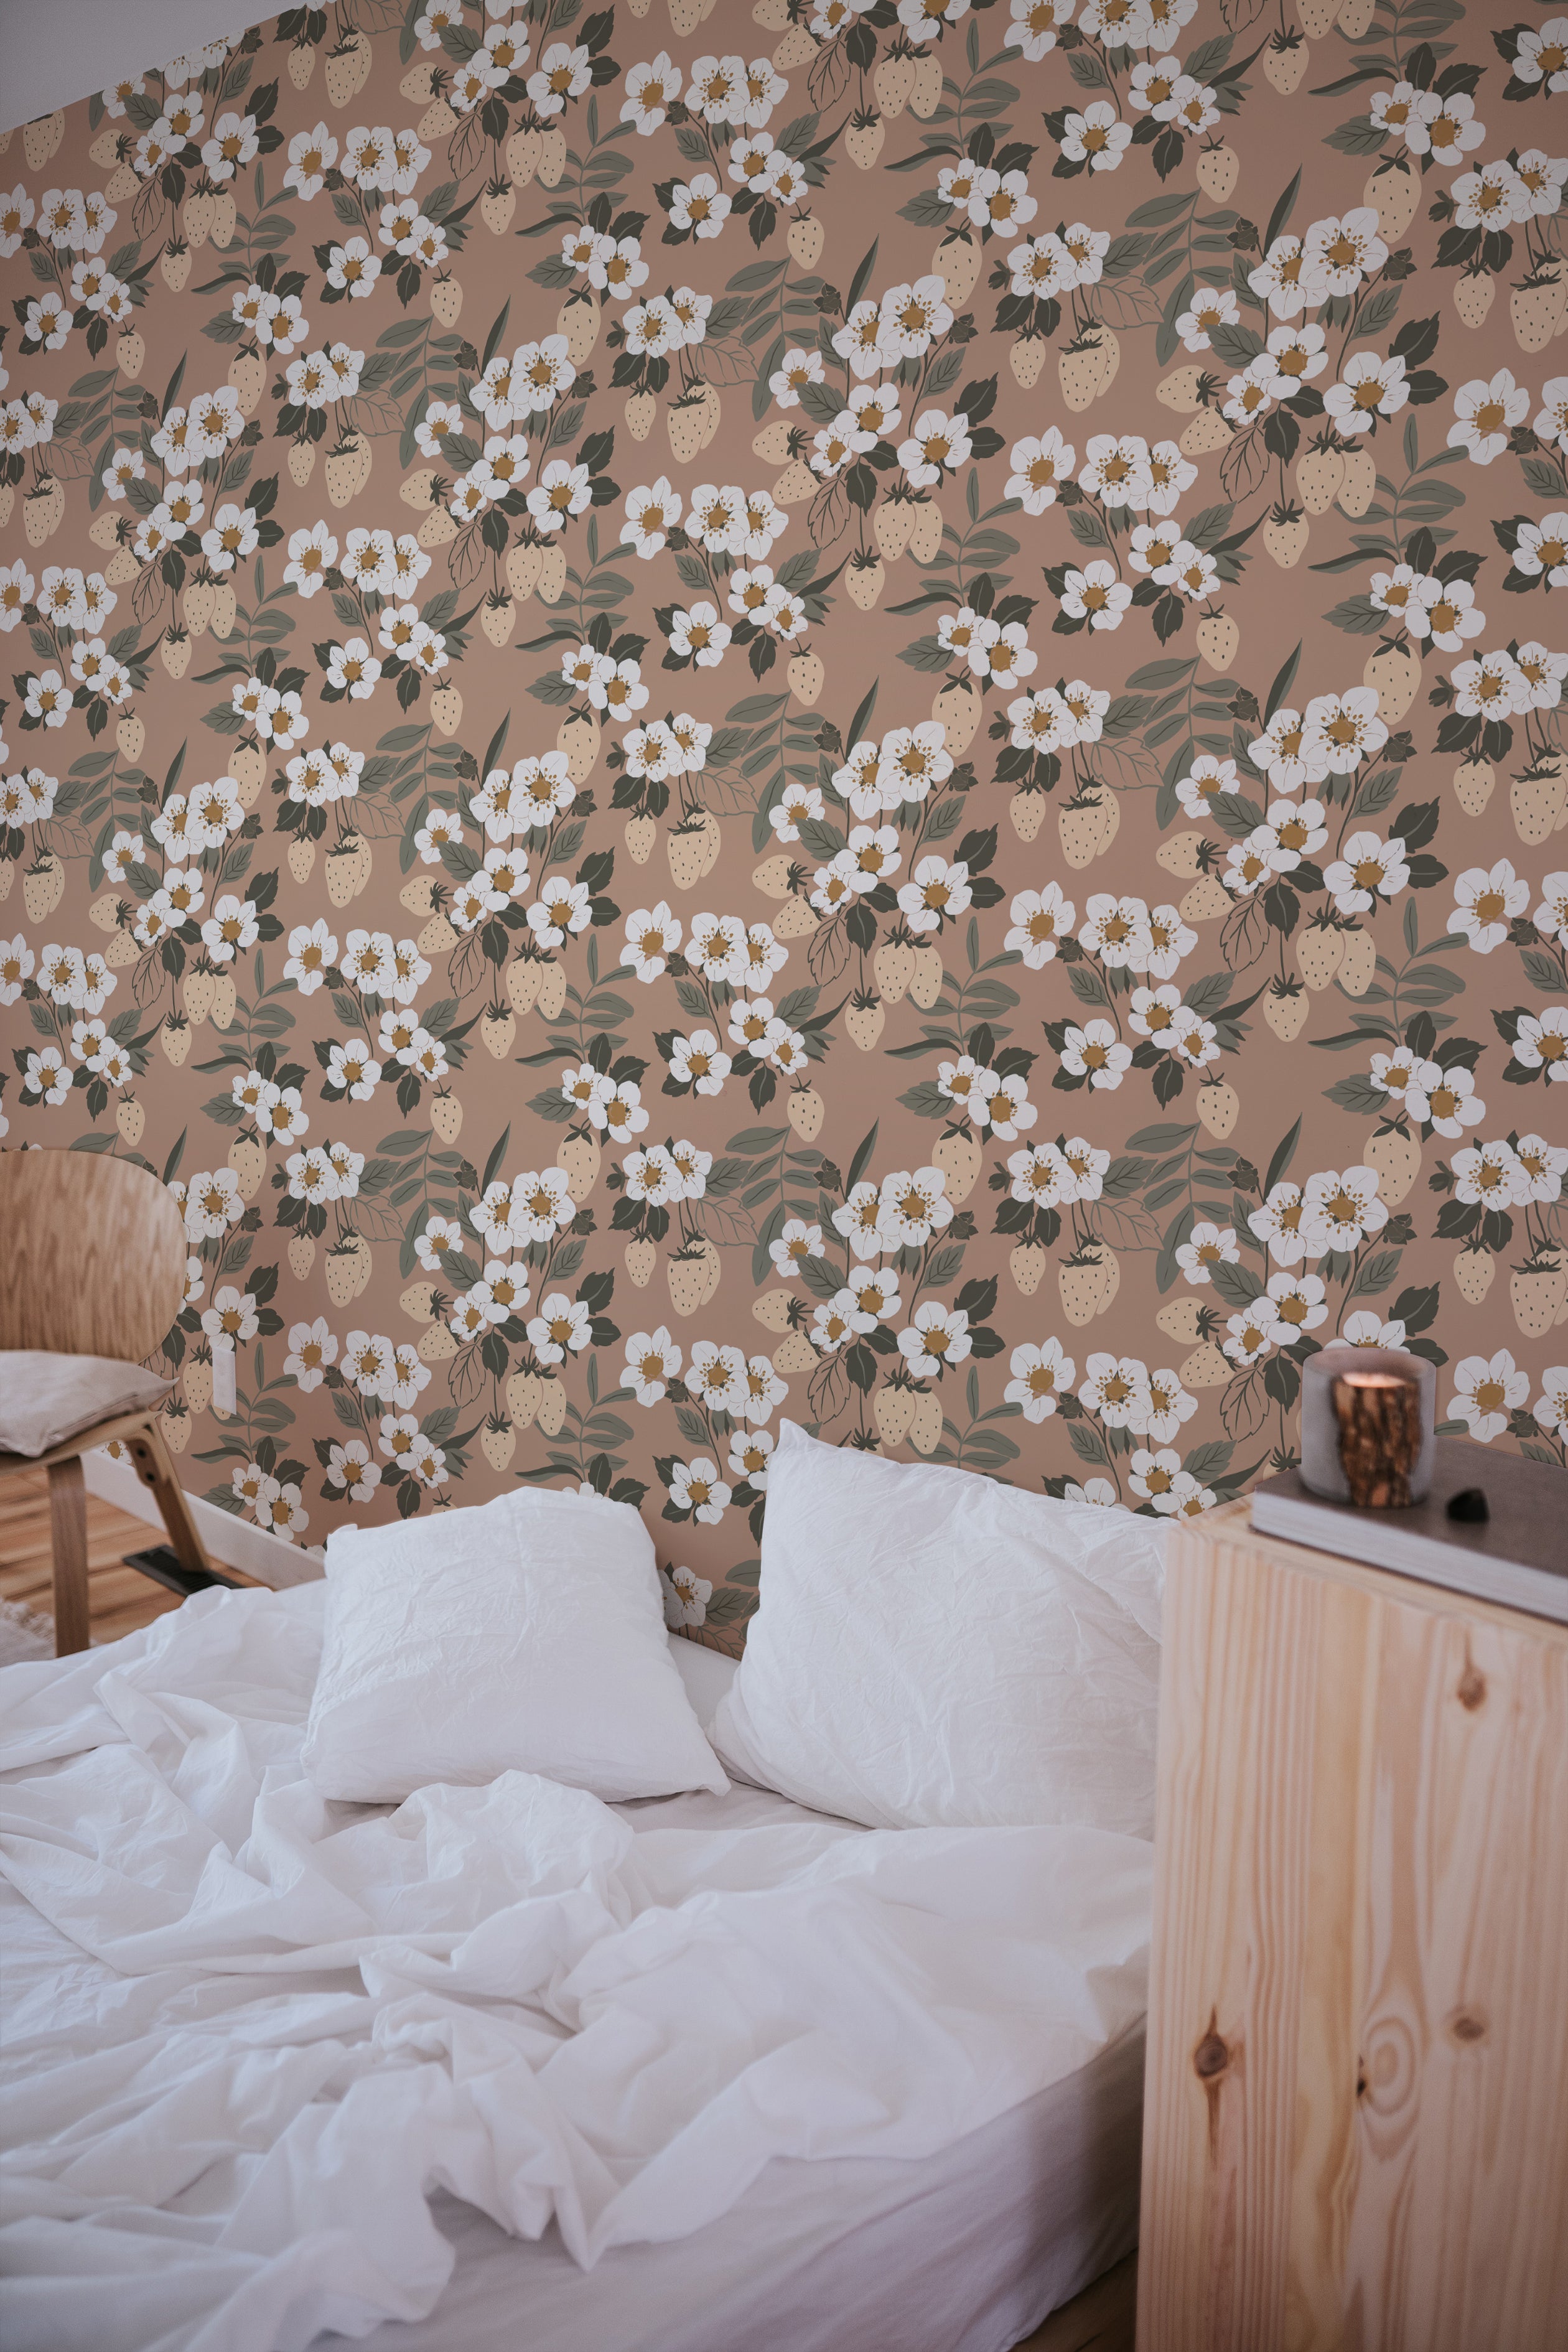 A cozy bedroom scene featuring a simple wooden bed with white bedding, set against a background of Forest Strawberries Wallpaper. The wallpaper has a charming pattern of white flowers and light green leaves interspersed with soft pink strawberries on a warm taupe background.